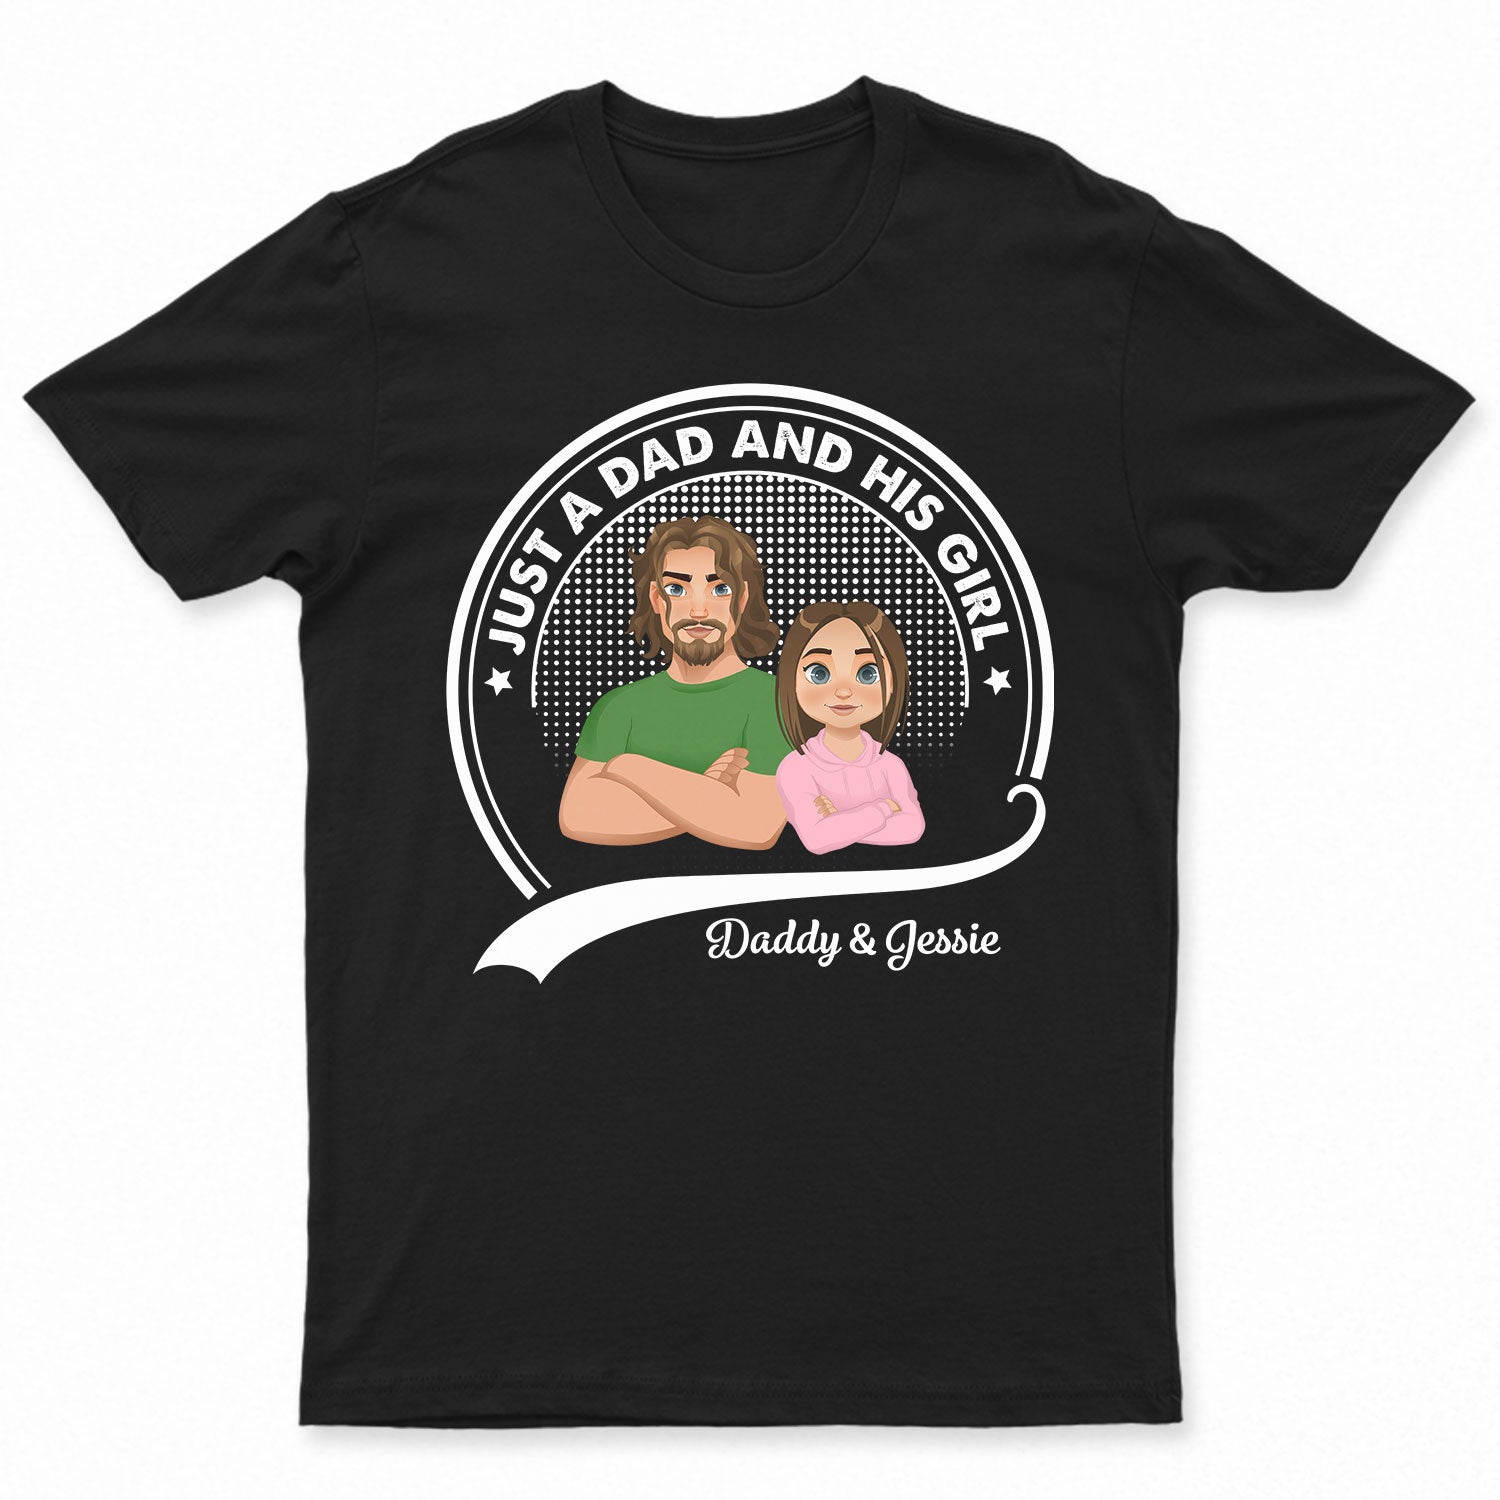 Just A Dad And His Girl - Gift For Father - Personalized T Shirt